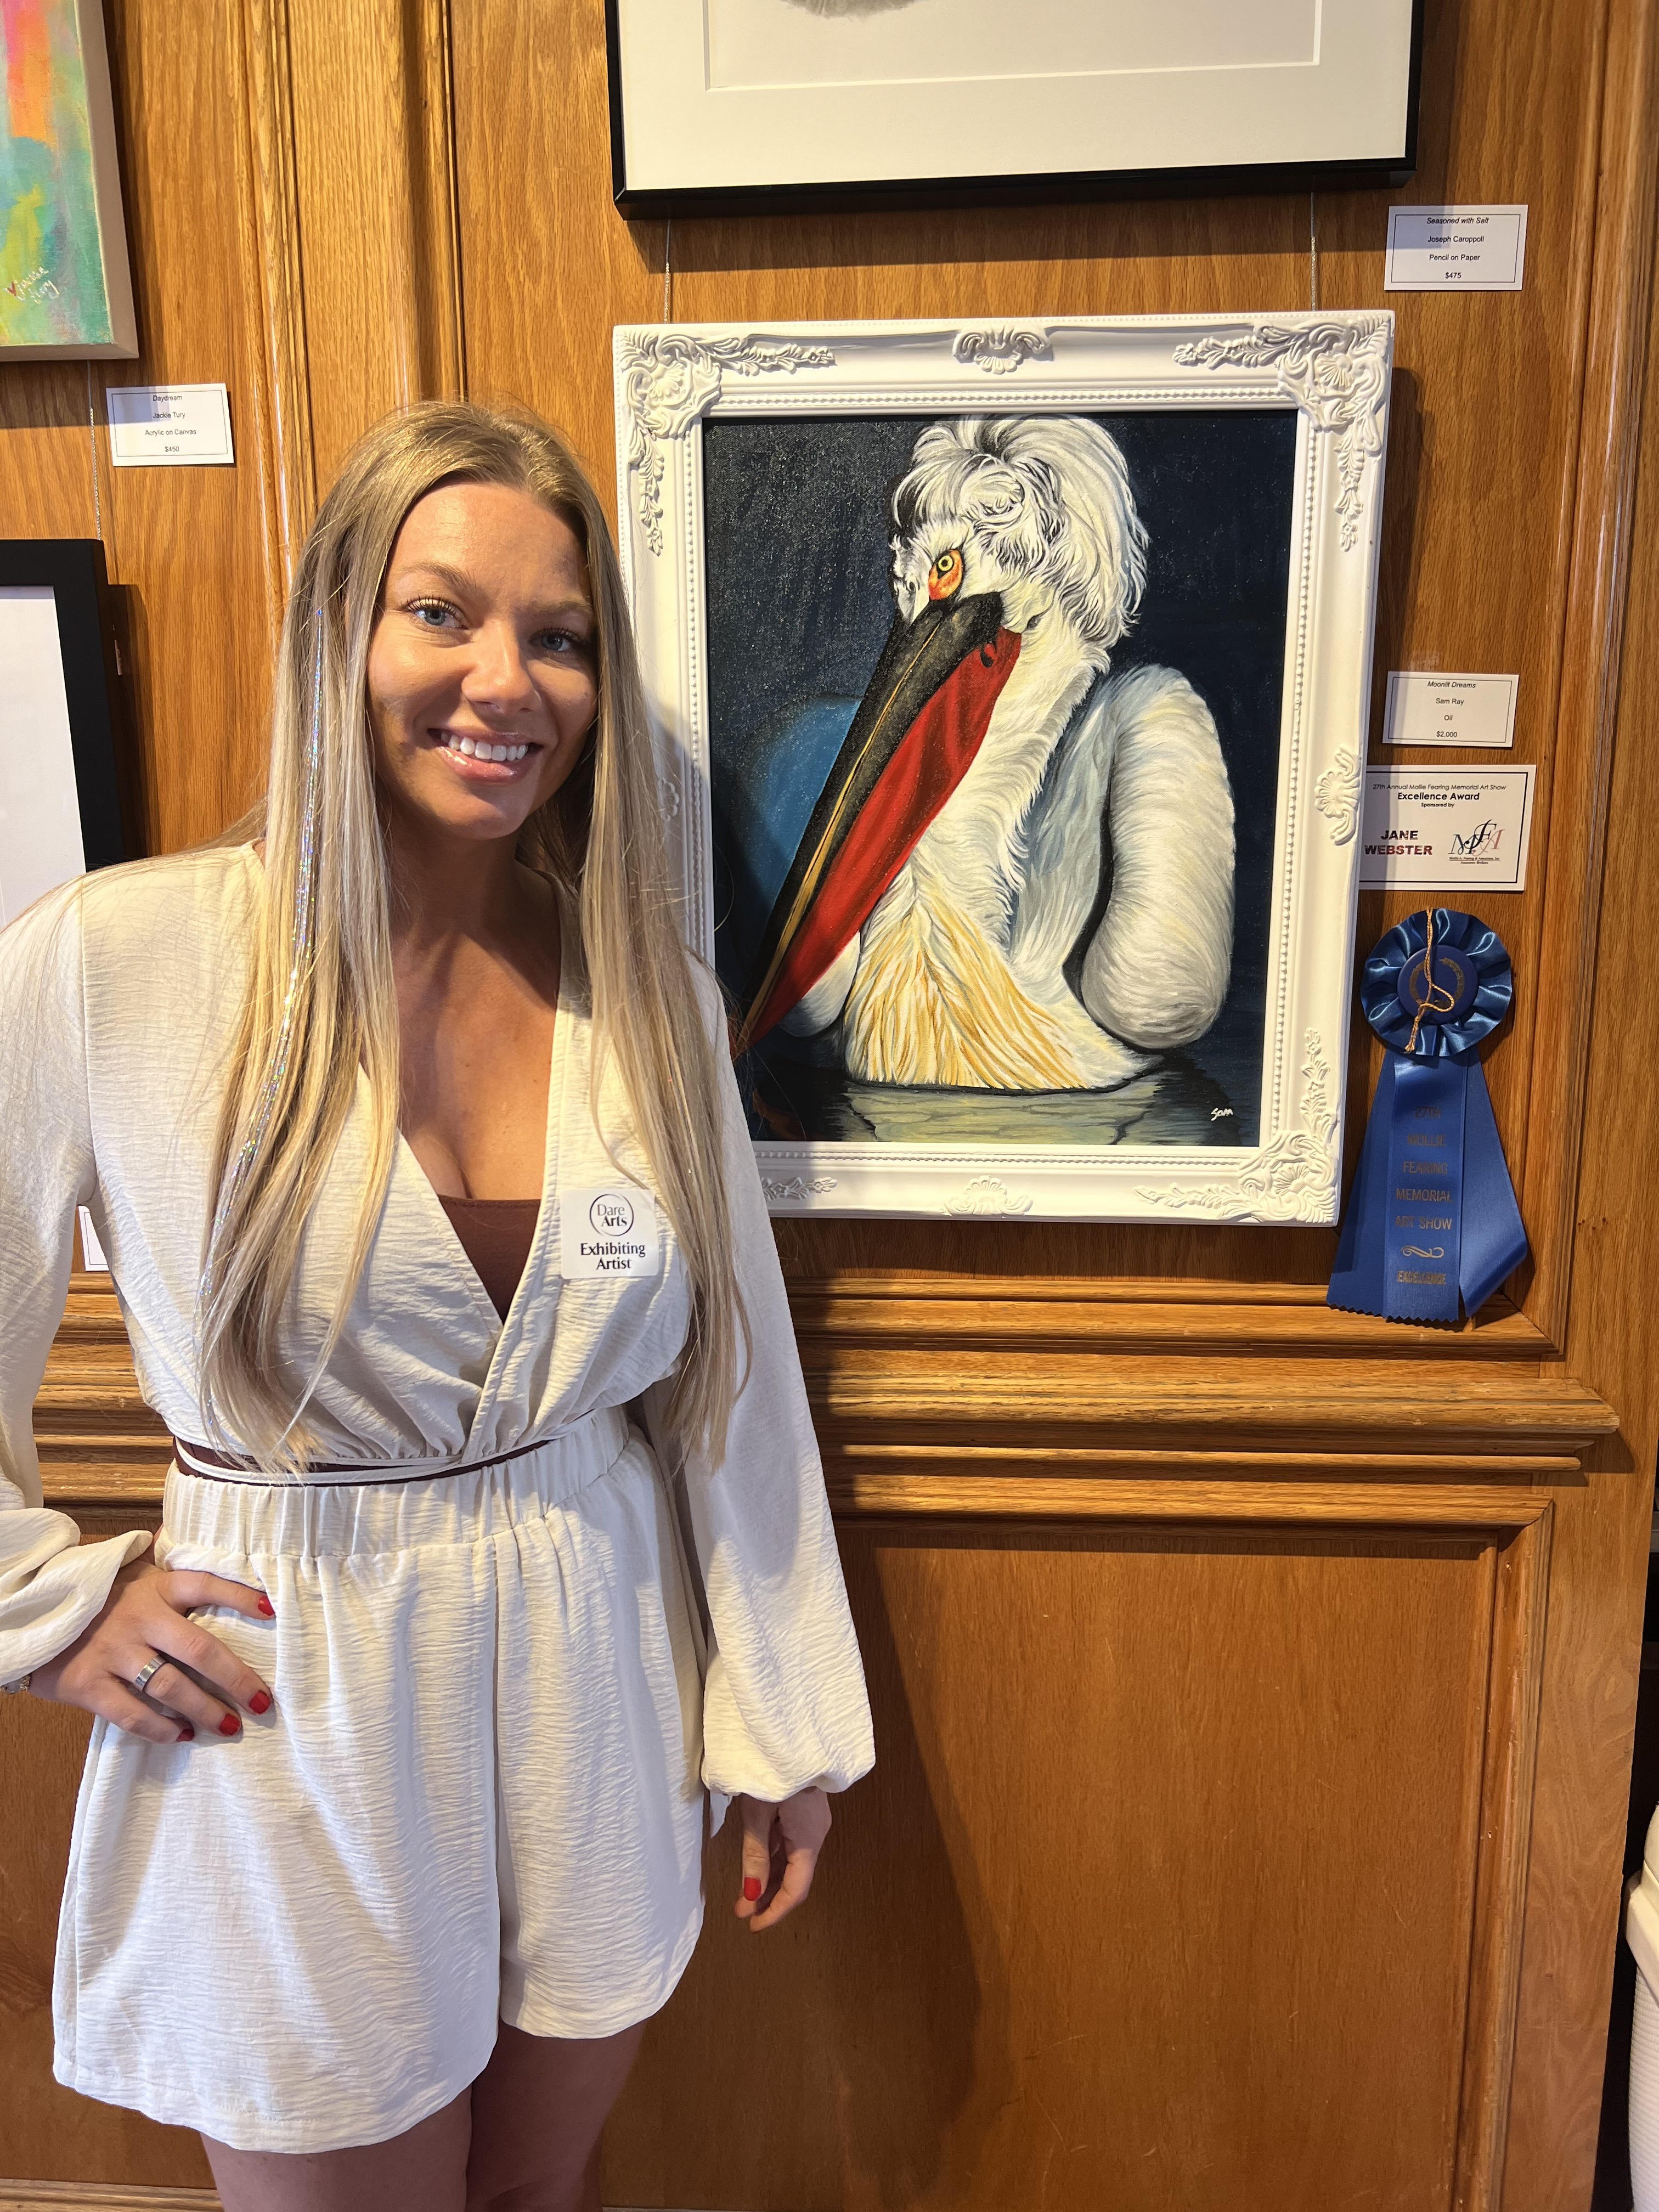 Excellence Award recipient Sam Ray with her piece “Moonlit Dreams” (oil). Photo courtesy of Dare Arts.